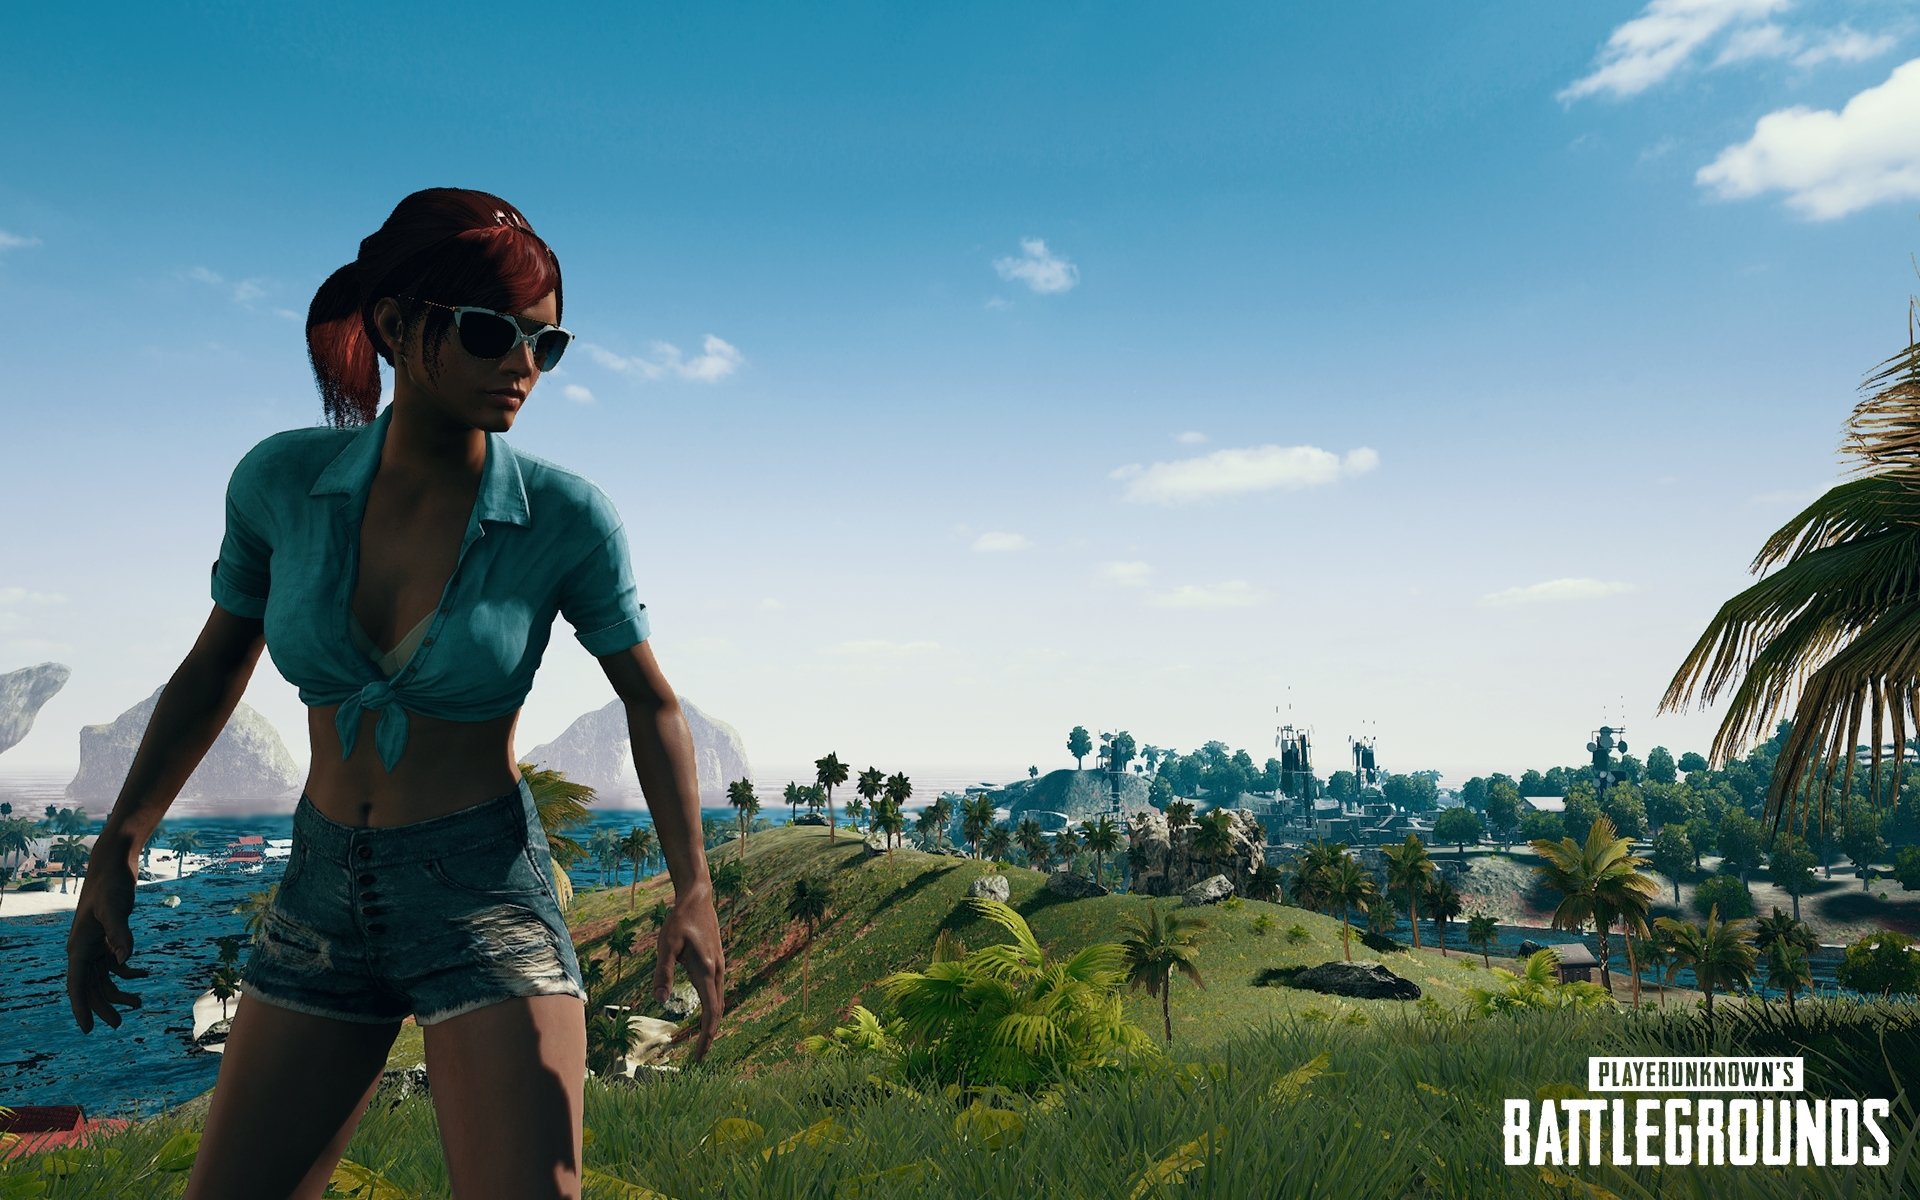 A scene from the new Sanhok Map in PlayerUnknown's Battlegrounds.